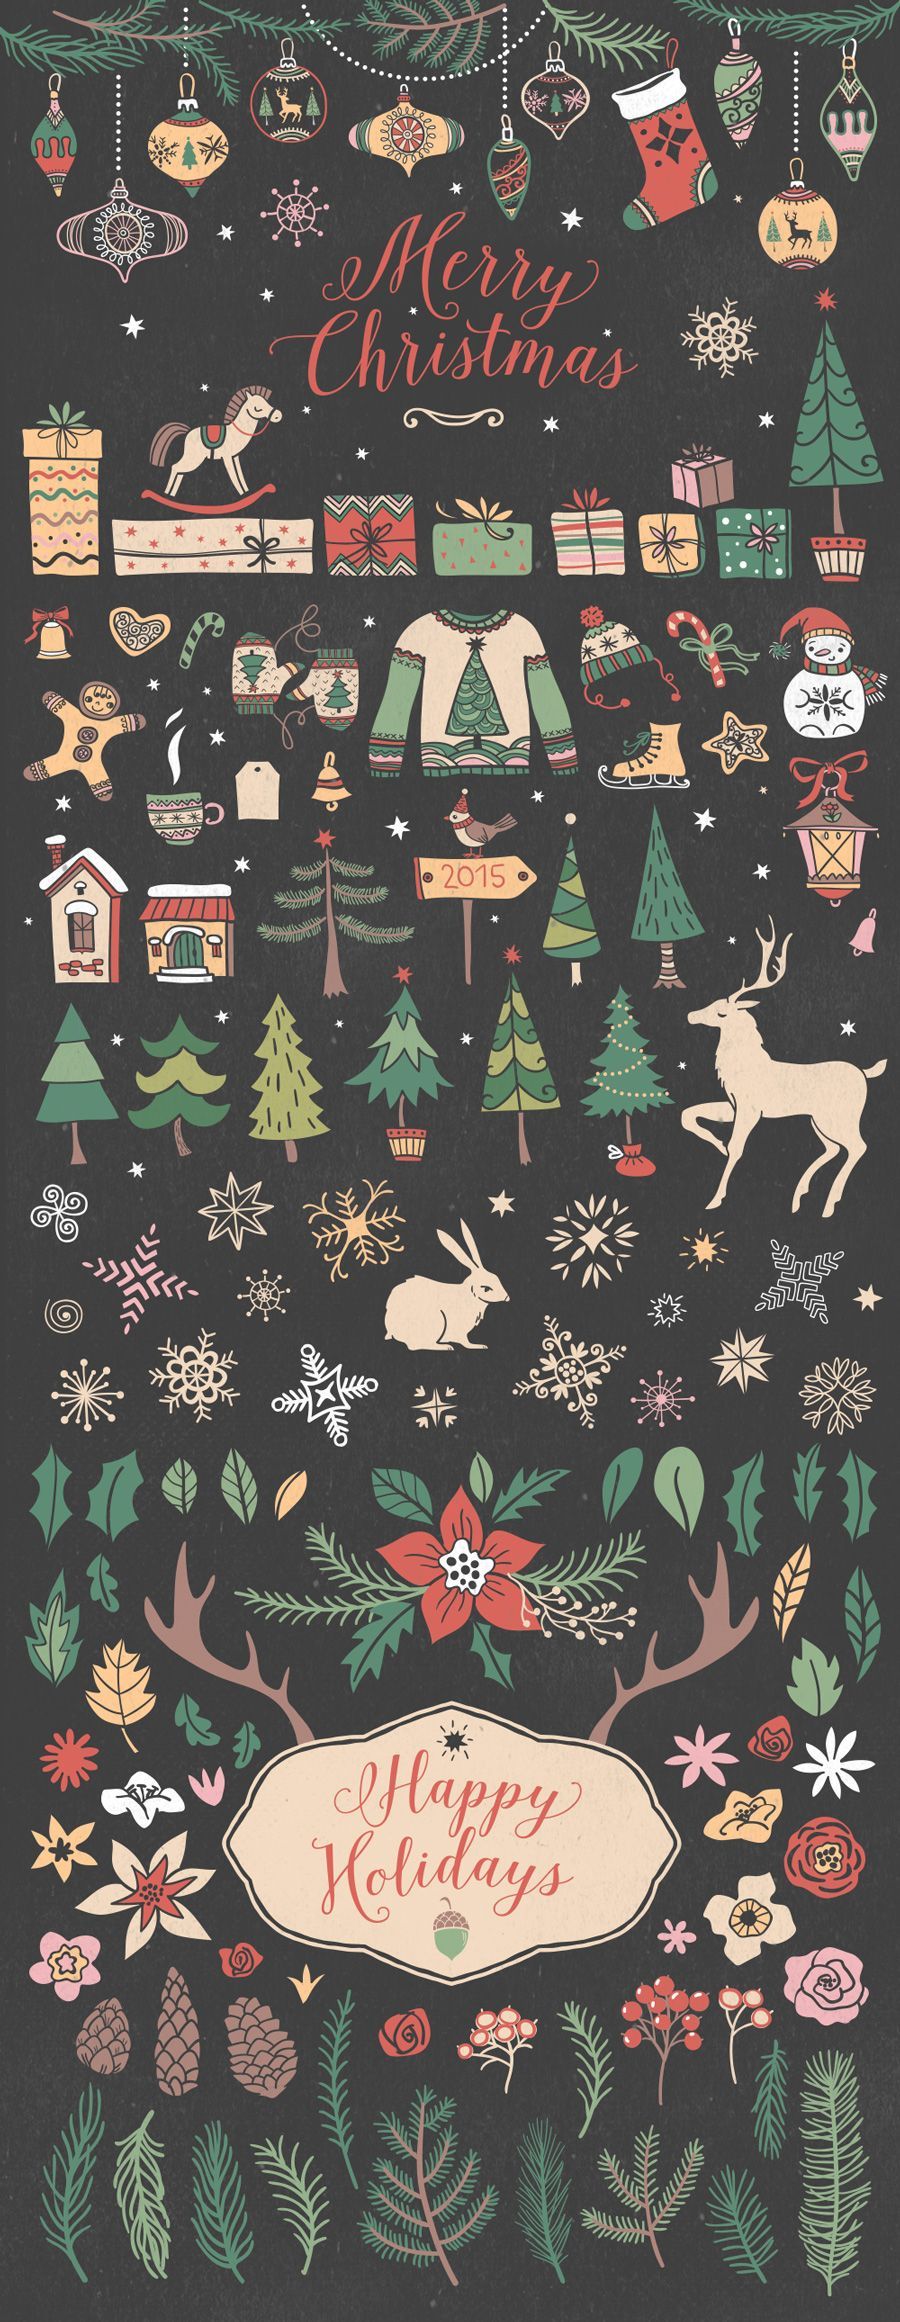 Christmas collection by kite-kit on Creative Market